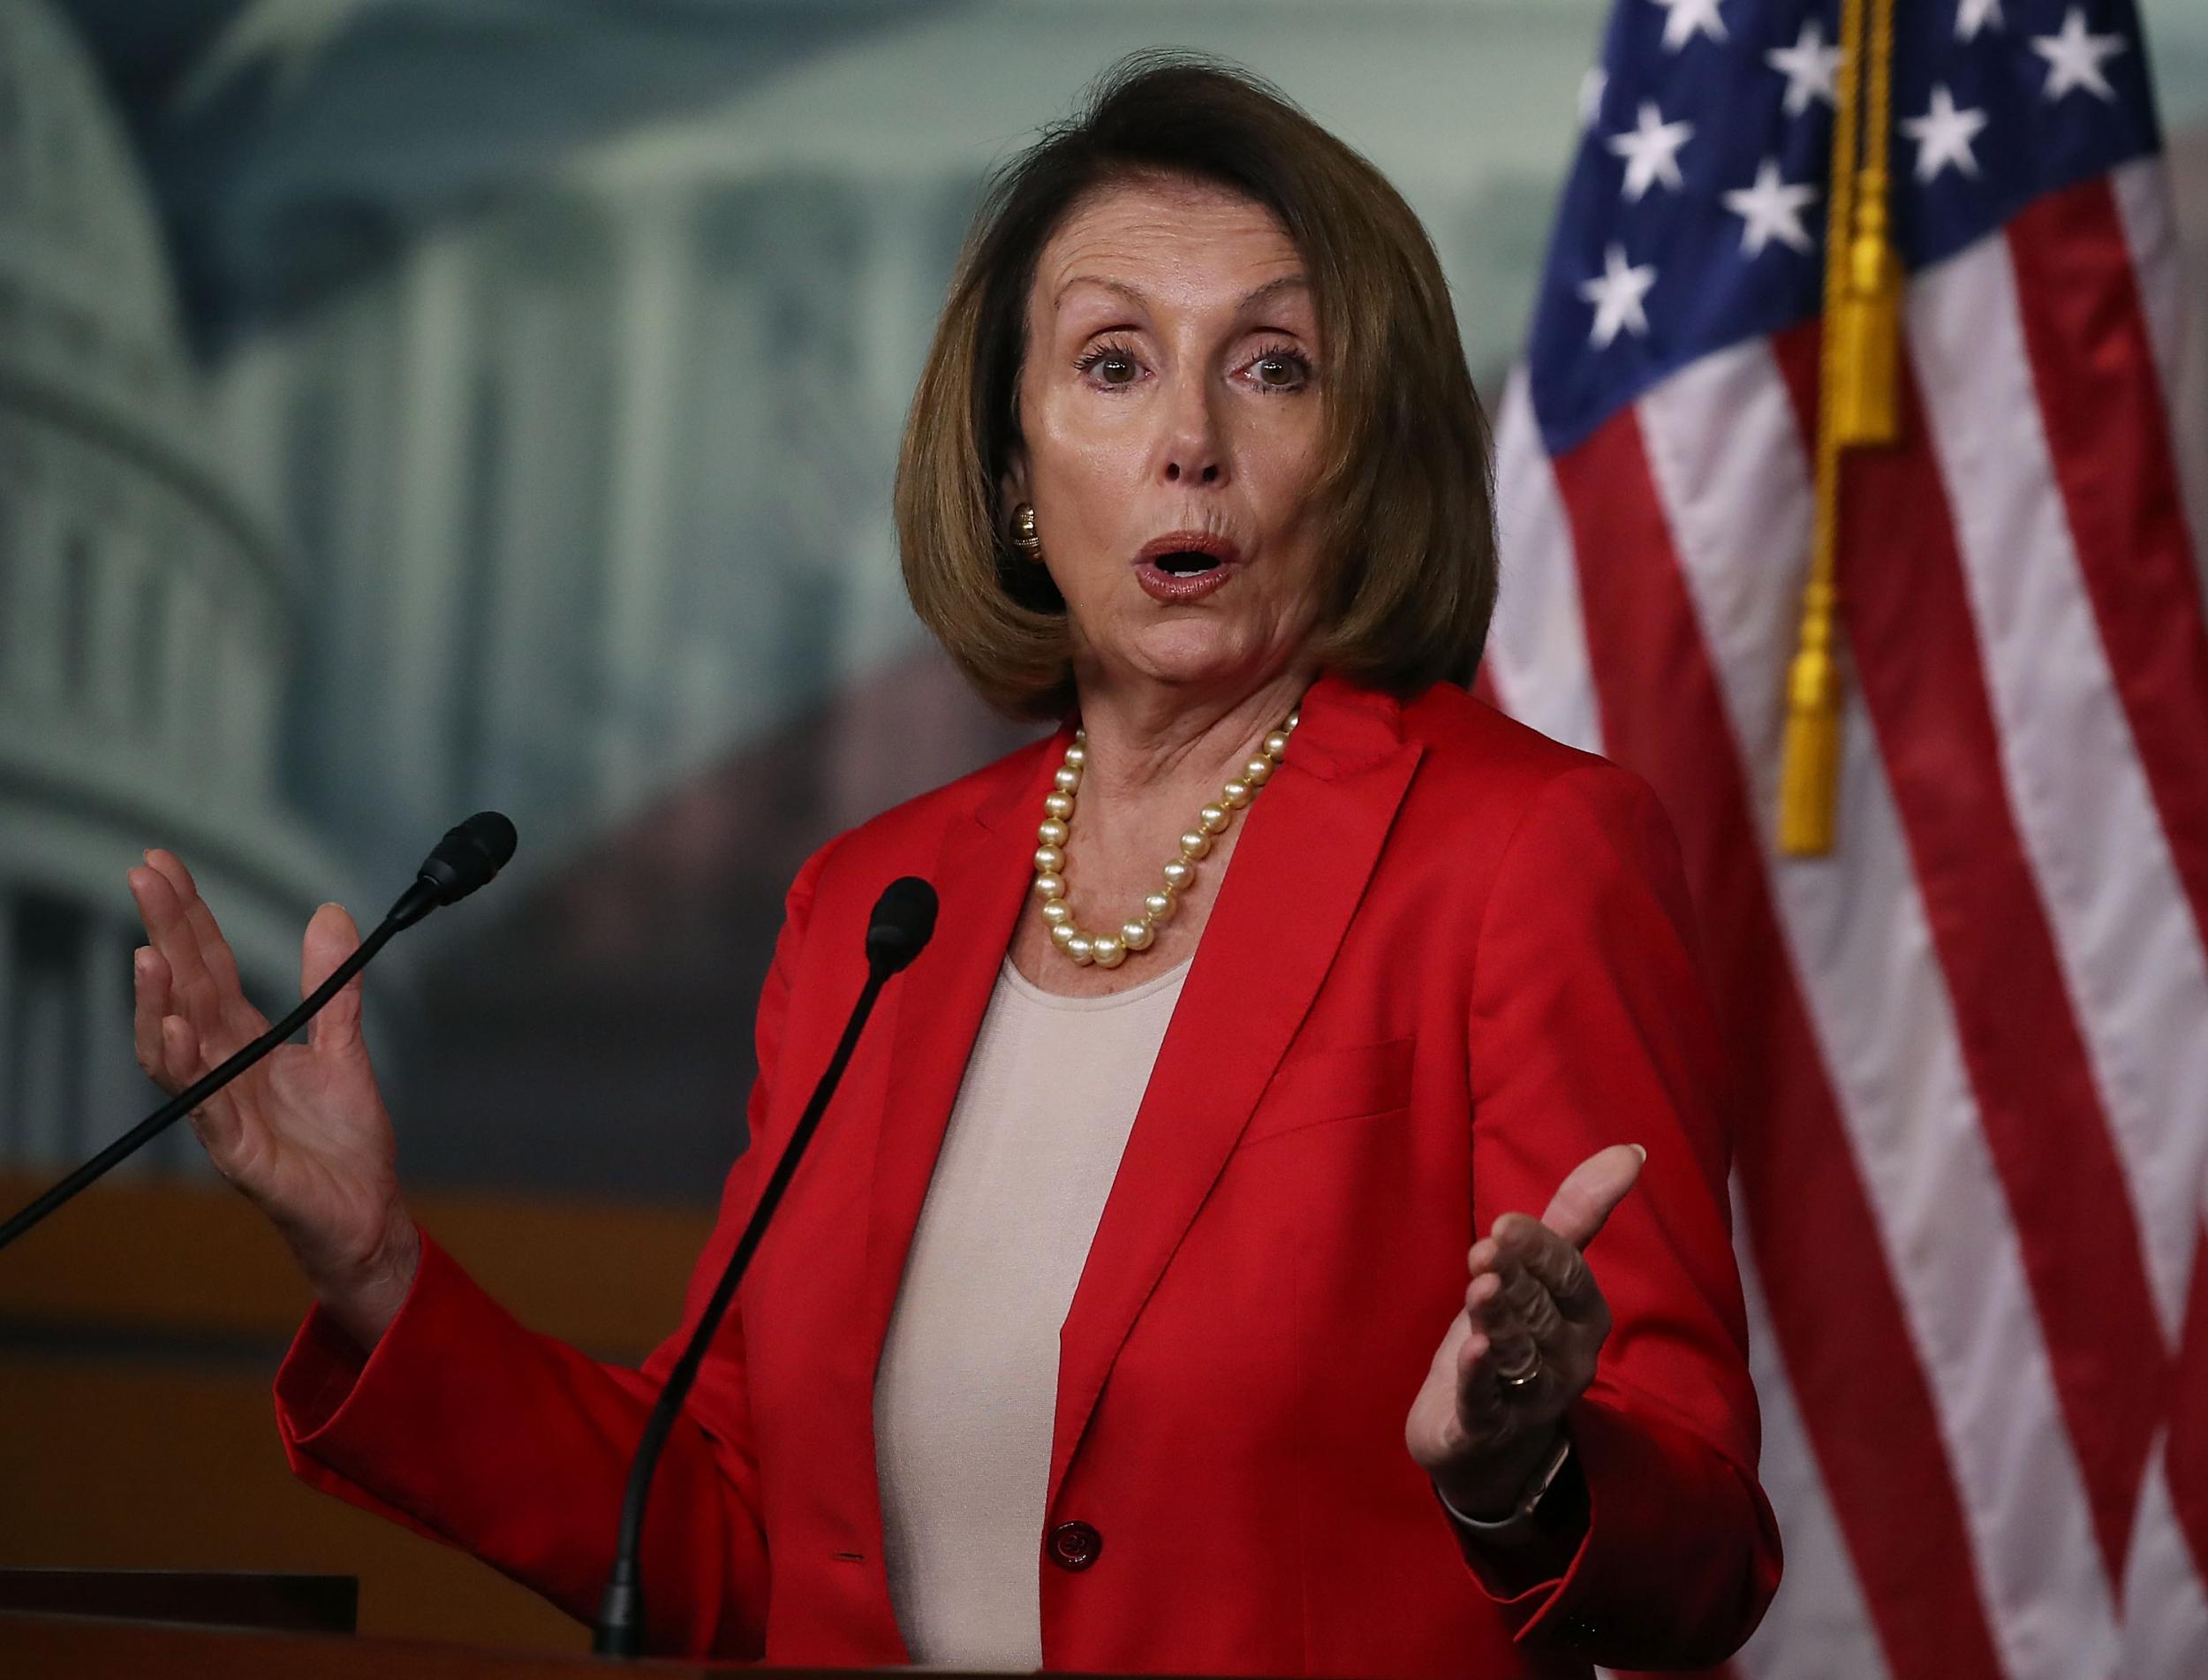 House Minority Leader Nancy Pelosi has asked Speaker of the House Paul Ryan to hold a vote on the Violence Against Women Reauthorisation Act